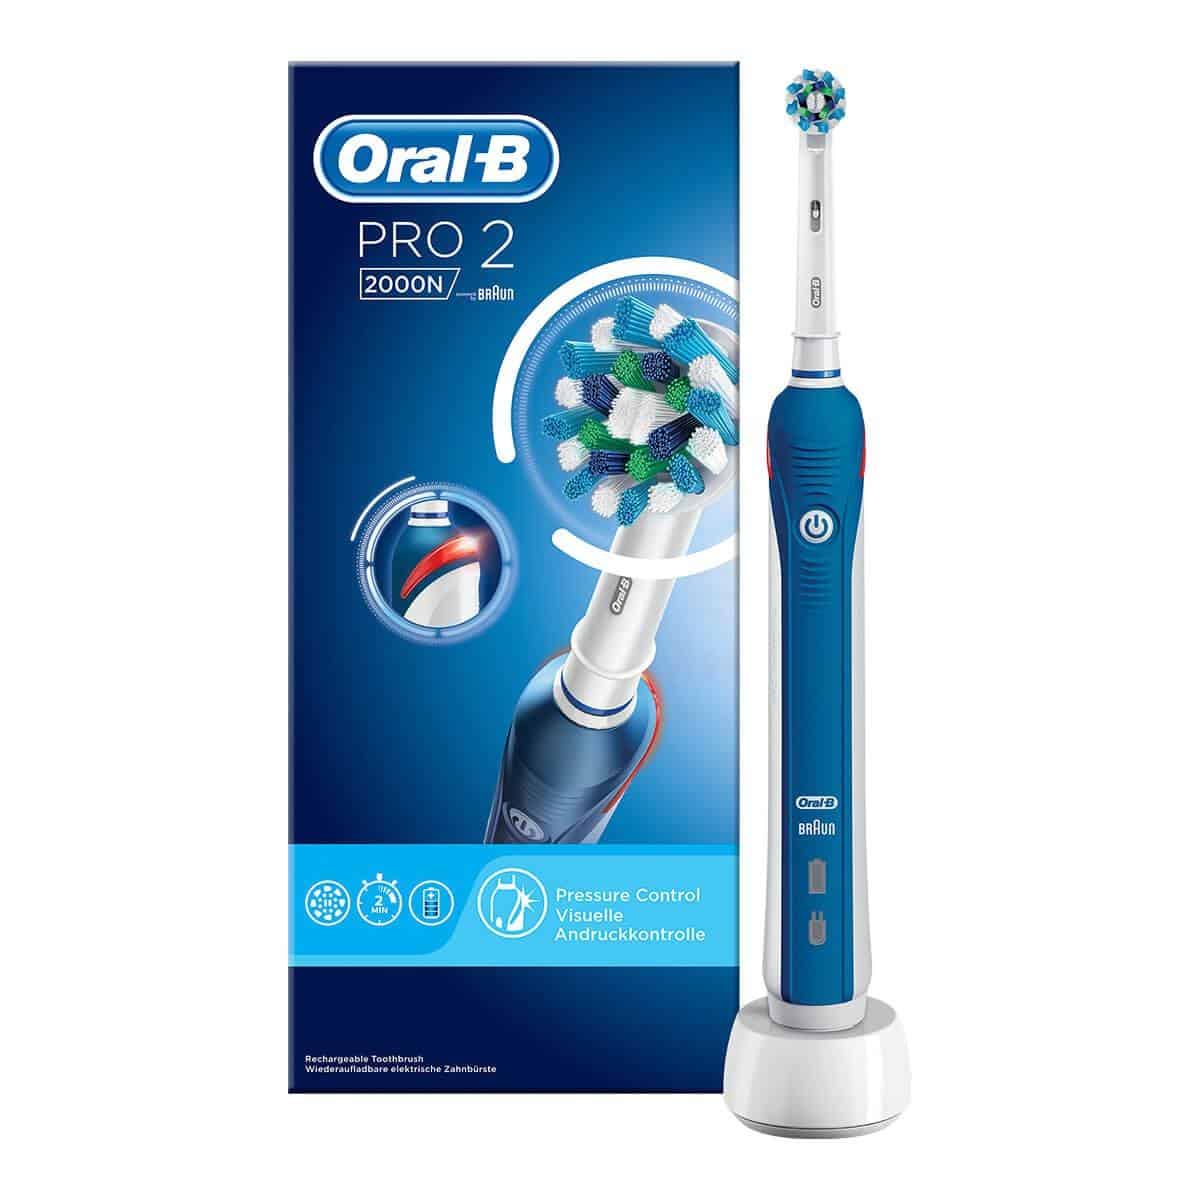 Oral B pro 2 2000N toothbrush and box